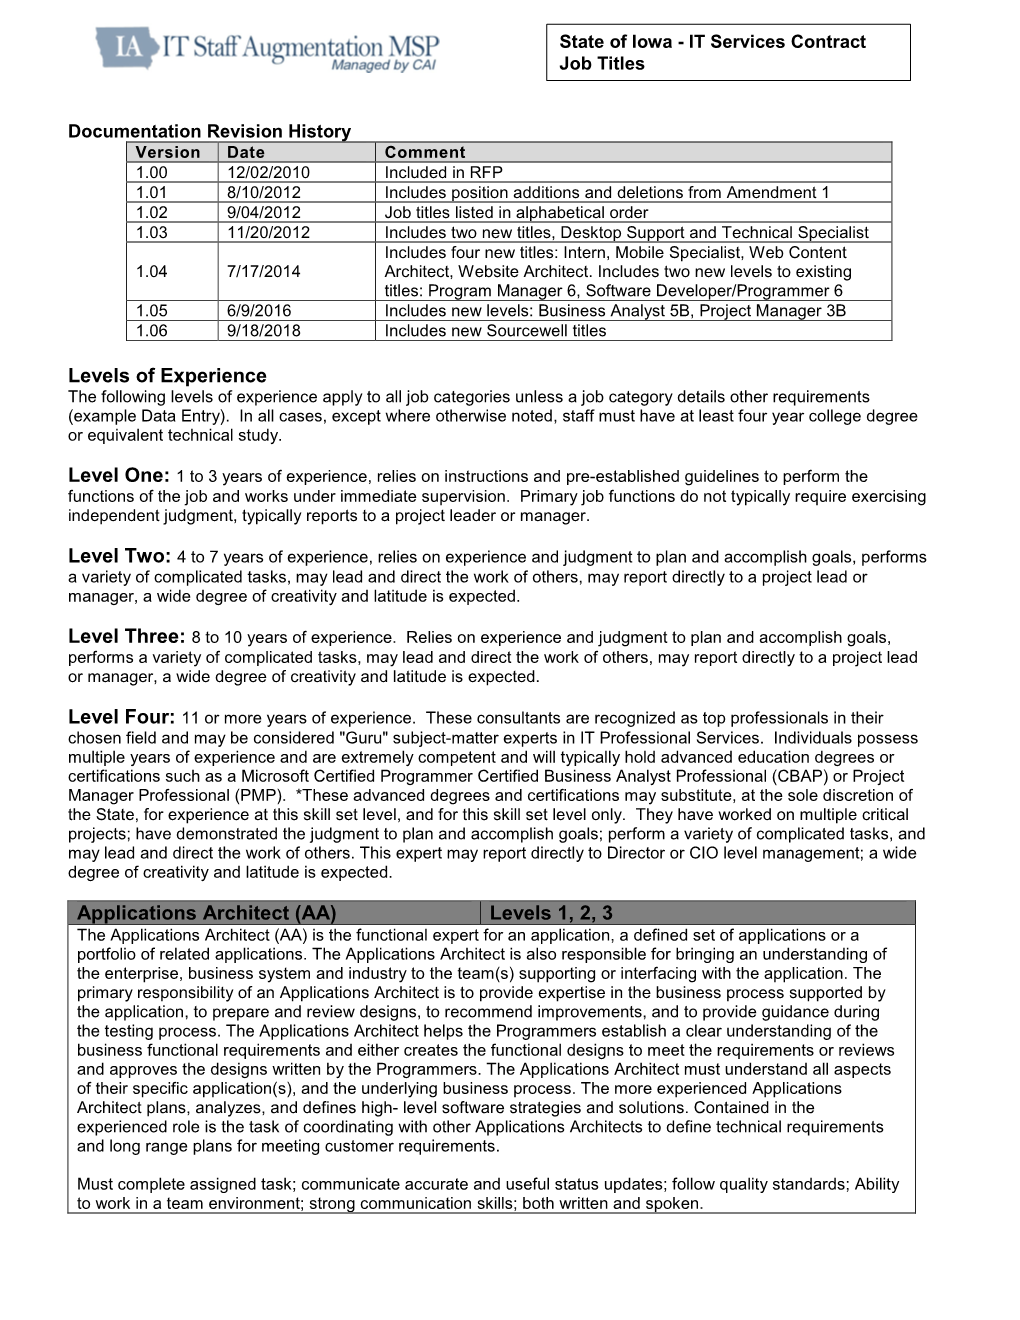 Levels of Experience Applications Architect (AA) Levels 1, 2, 3